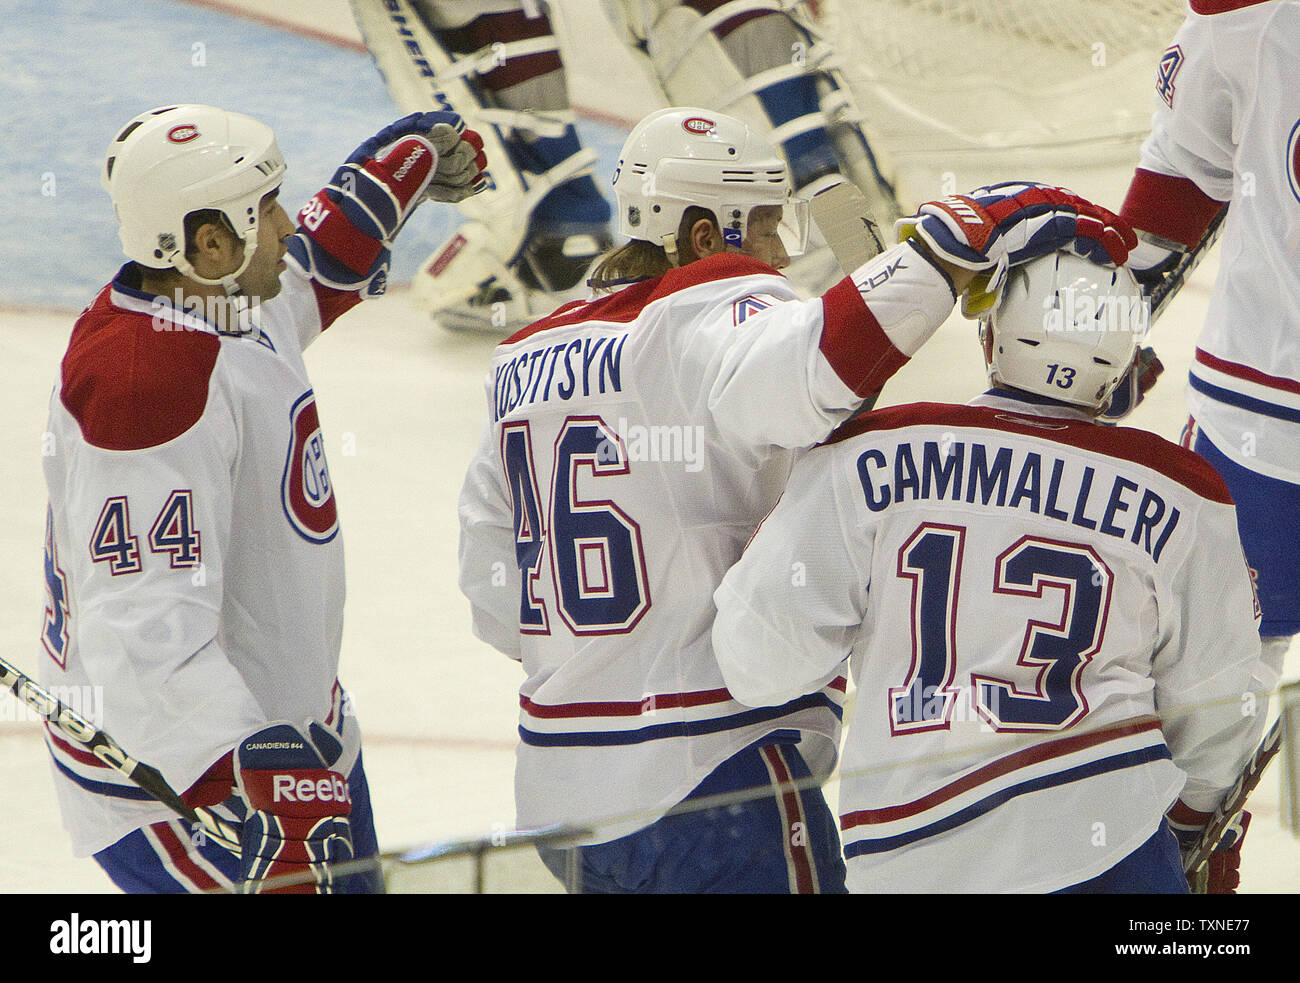 Montreal Canadiens Roman Hamrlik (44) and Andrei Kostitsyn congratulate teammate Michael Cammalleri after his first period goal against the Colorado Avalache at the Pepsi Center in Denver on December 19, 2010.  The Canadiens lead the Northeast division with the Avalanche percentage points behind the Northwest division lead.        UPI/Gary C. Caskey Stock Photo